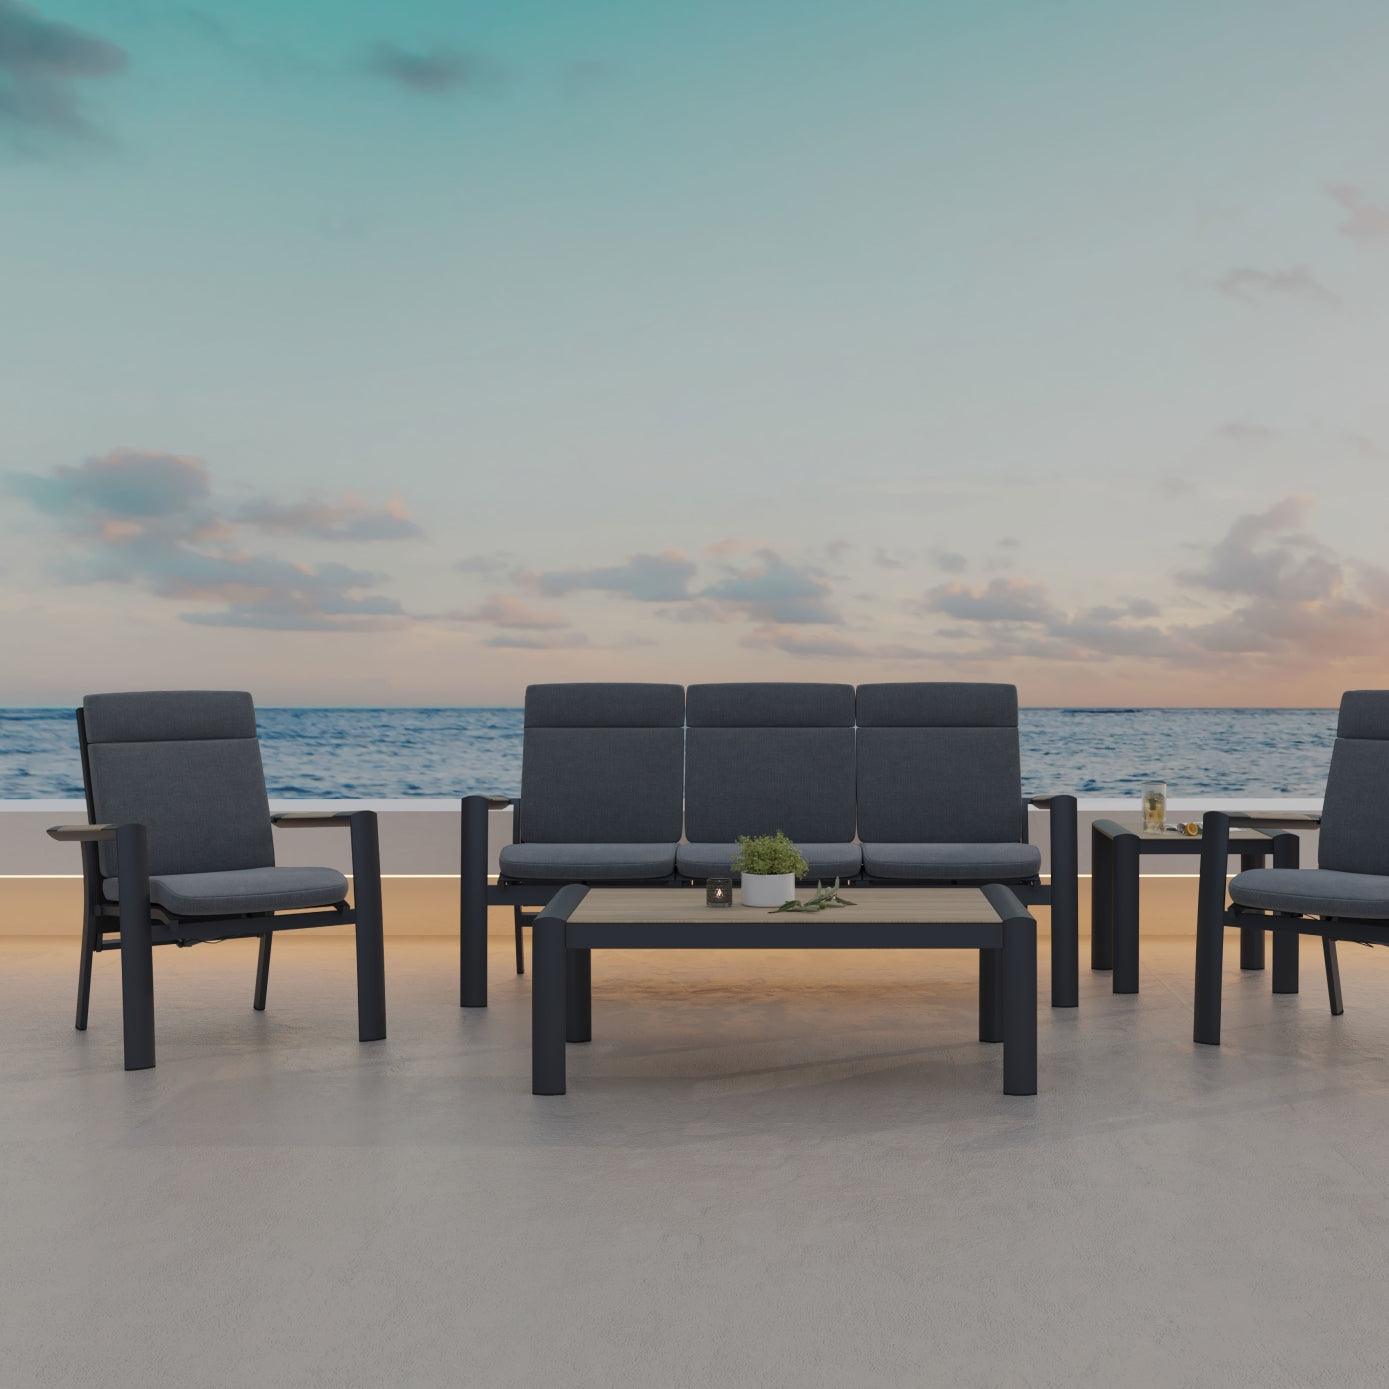 Capri 5-Piece grey aluminum outdoor conversation set with grey cushions, 1 three-seater sofa with adjustable backrest, 2 armchairs with adjustable backrest, 1 rectangle coffee table, 1 square side table, put in a deck- Jardina Furniture